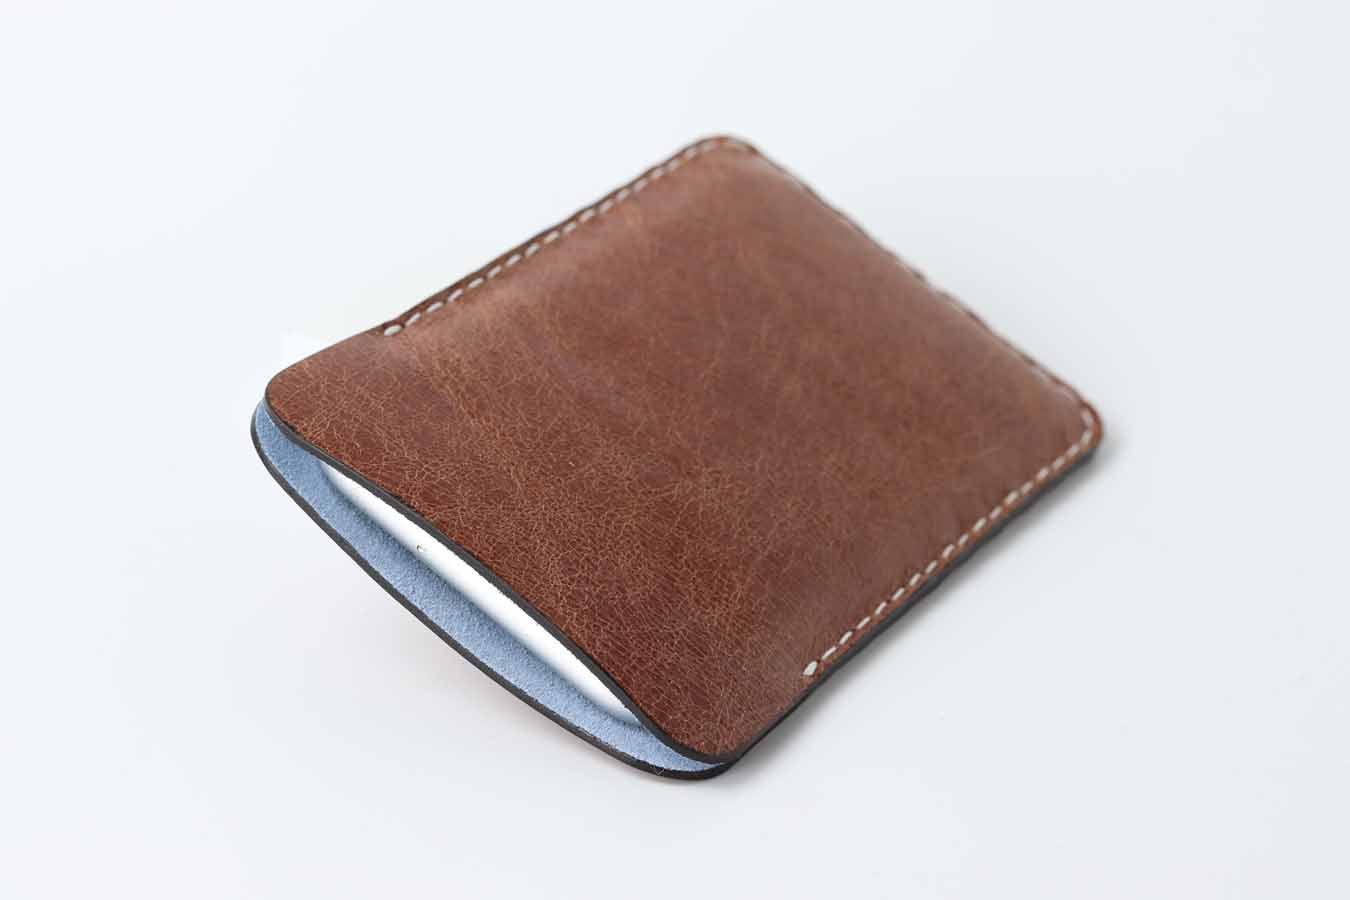 iPhone 13 pro brown leather sleeve pouch case with soft suede lining